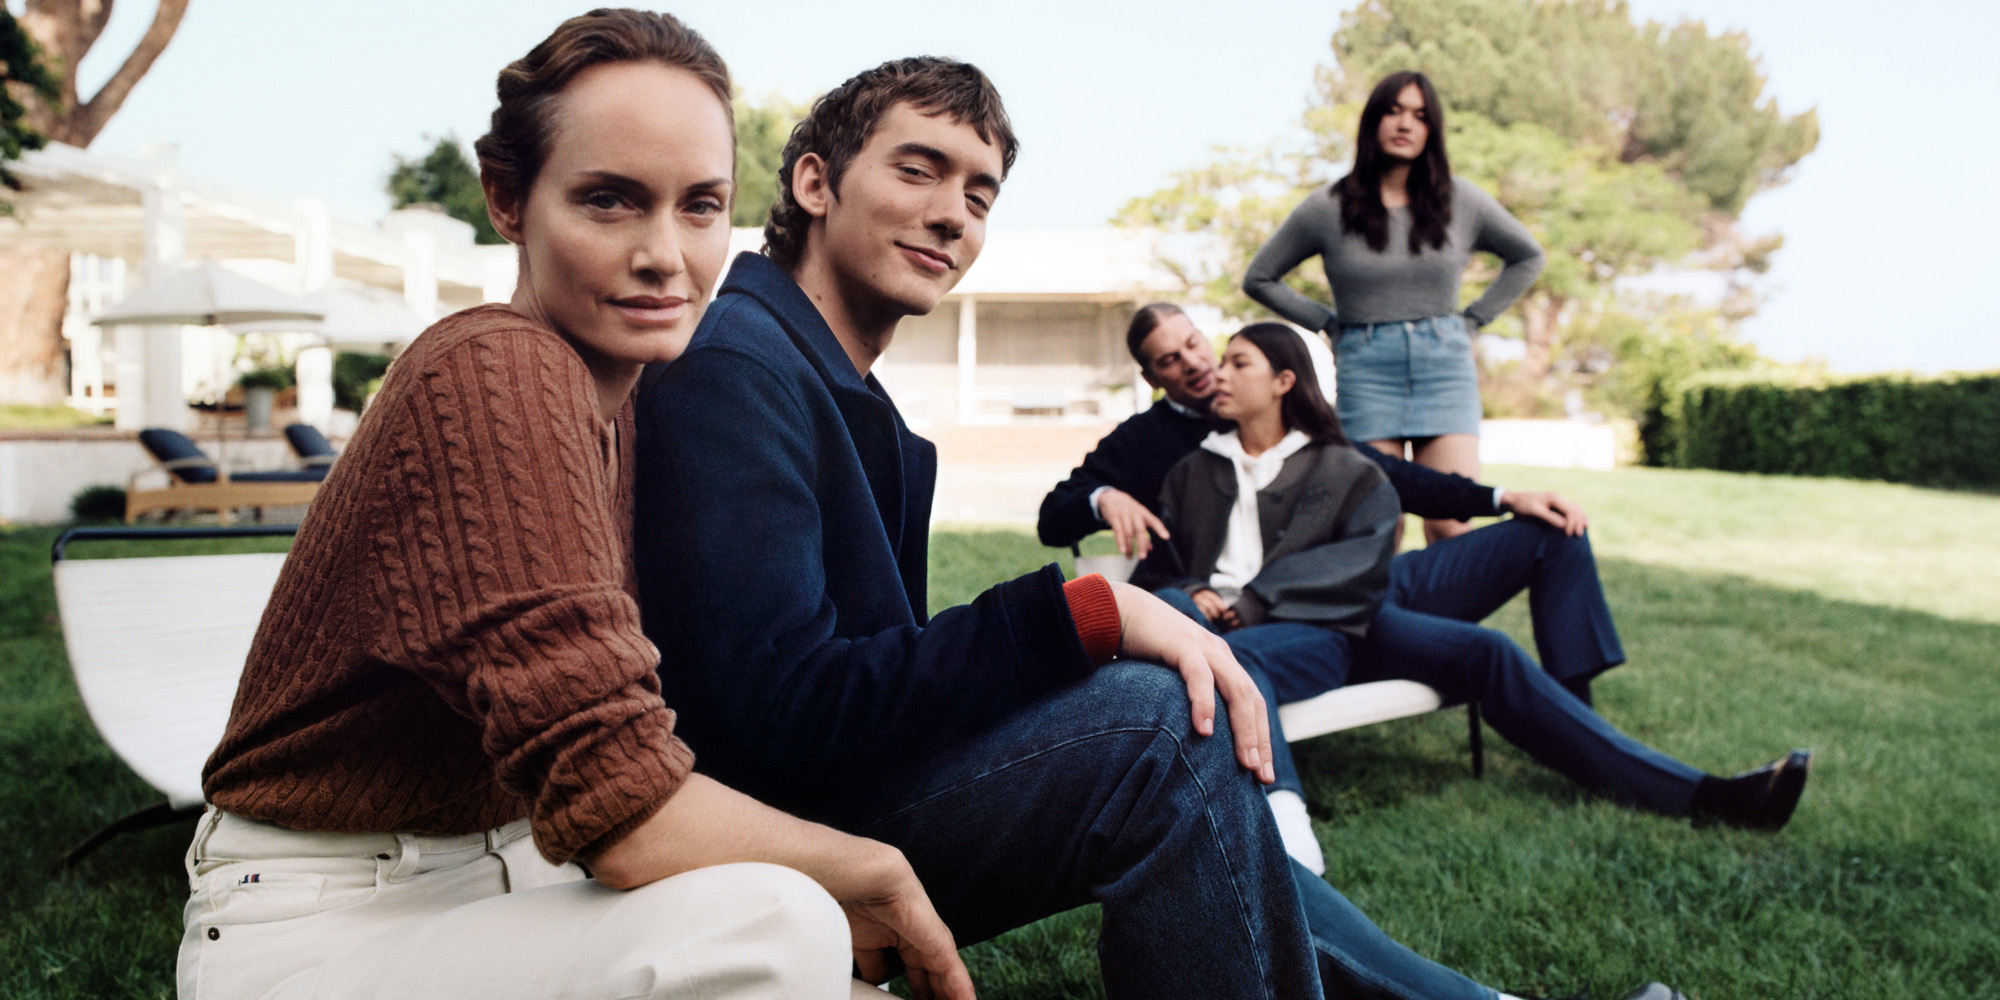 TOMMY HILFIGER FALL 2023 AD CAMPAIGN FEATURING A CELEBRITY CAST AND THEIR FAMILIES